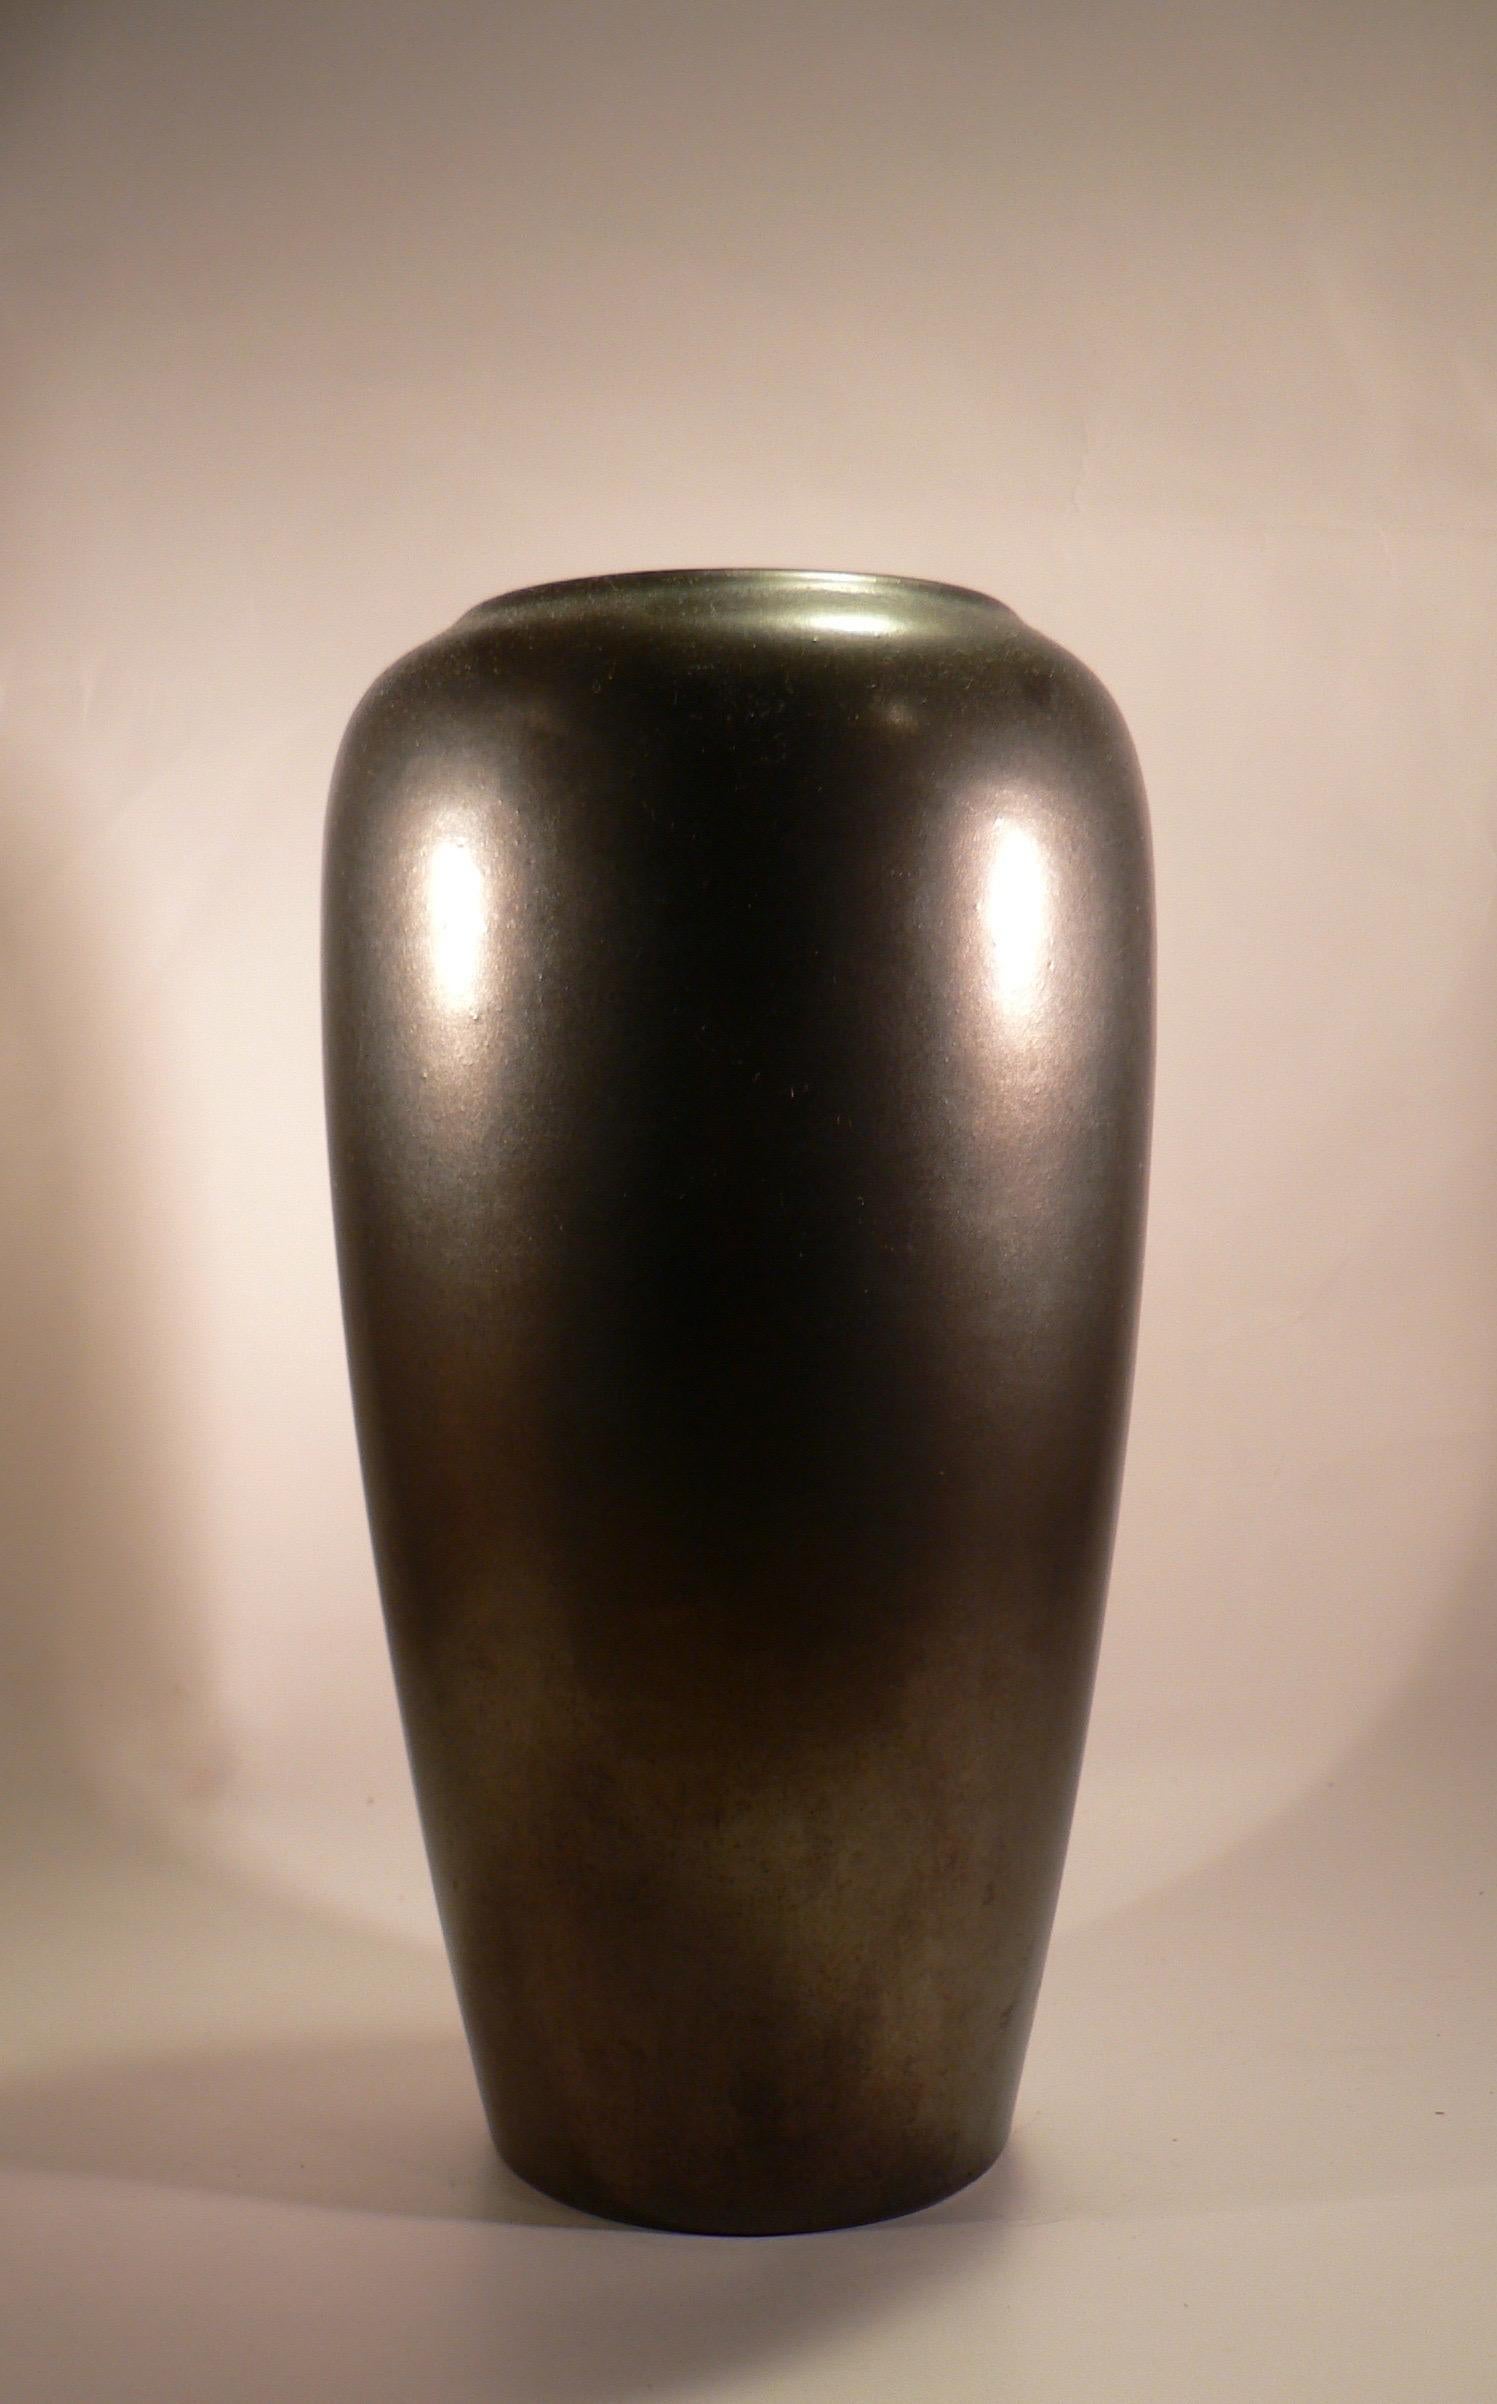 A black glazed ceramic vase from the 1970s. Stamped W.Germany.

Perfect condition.

